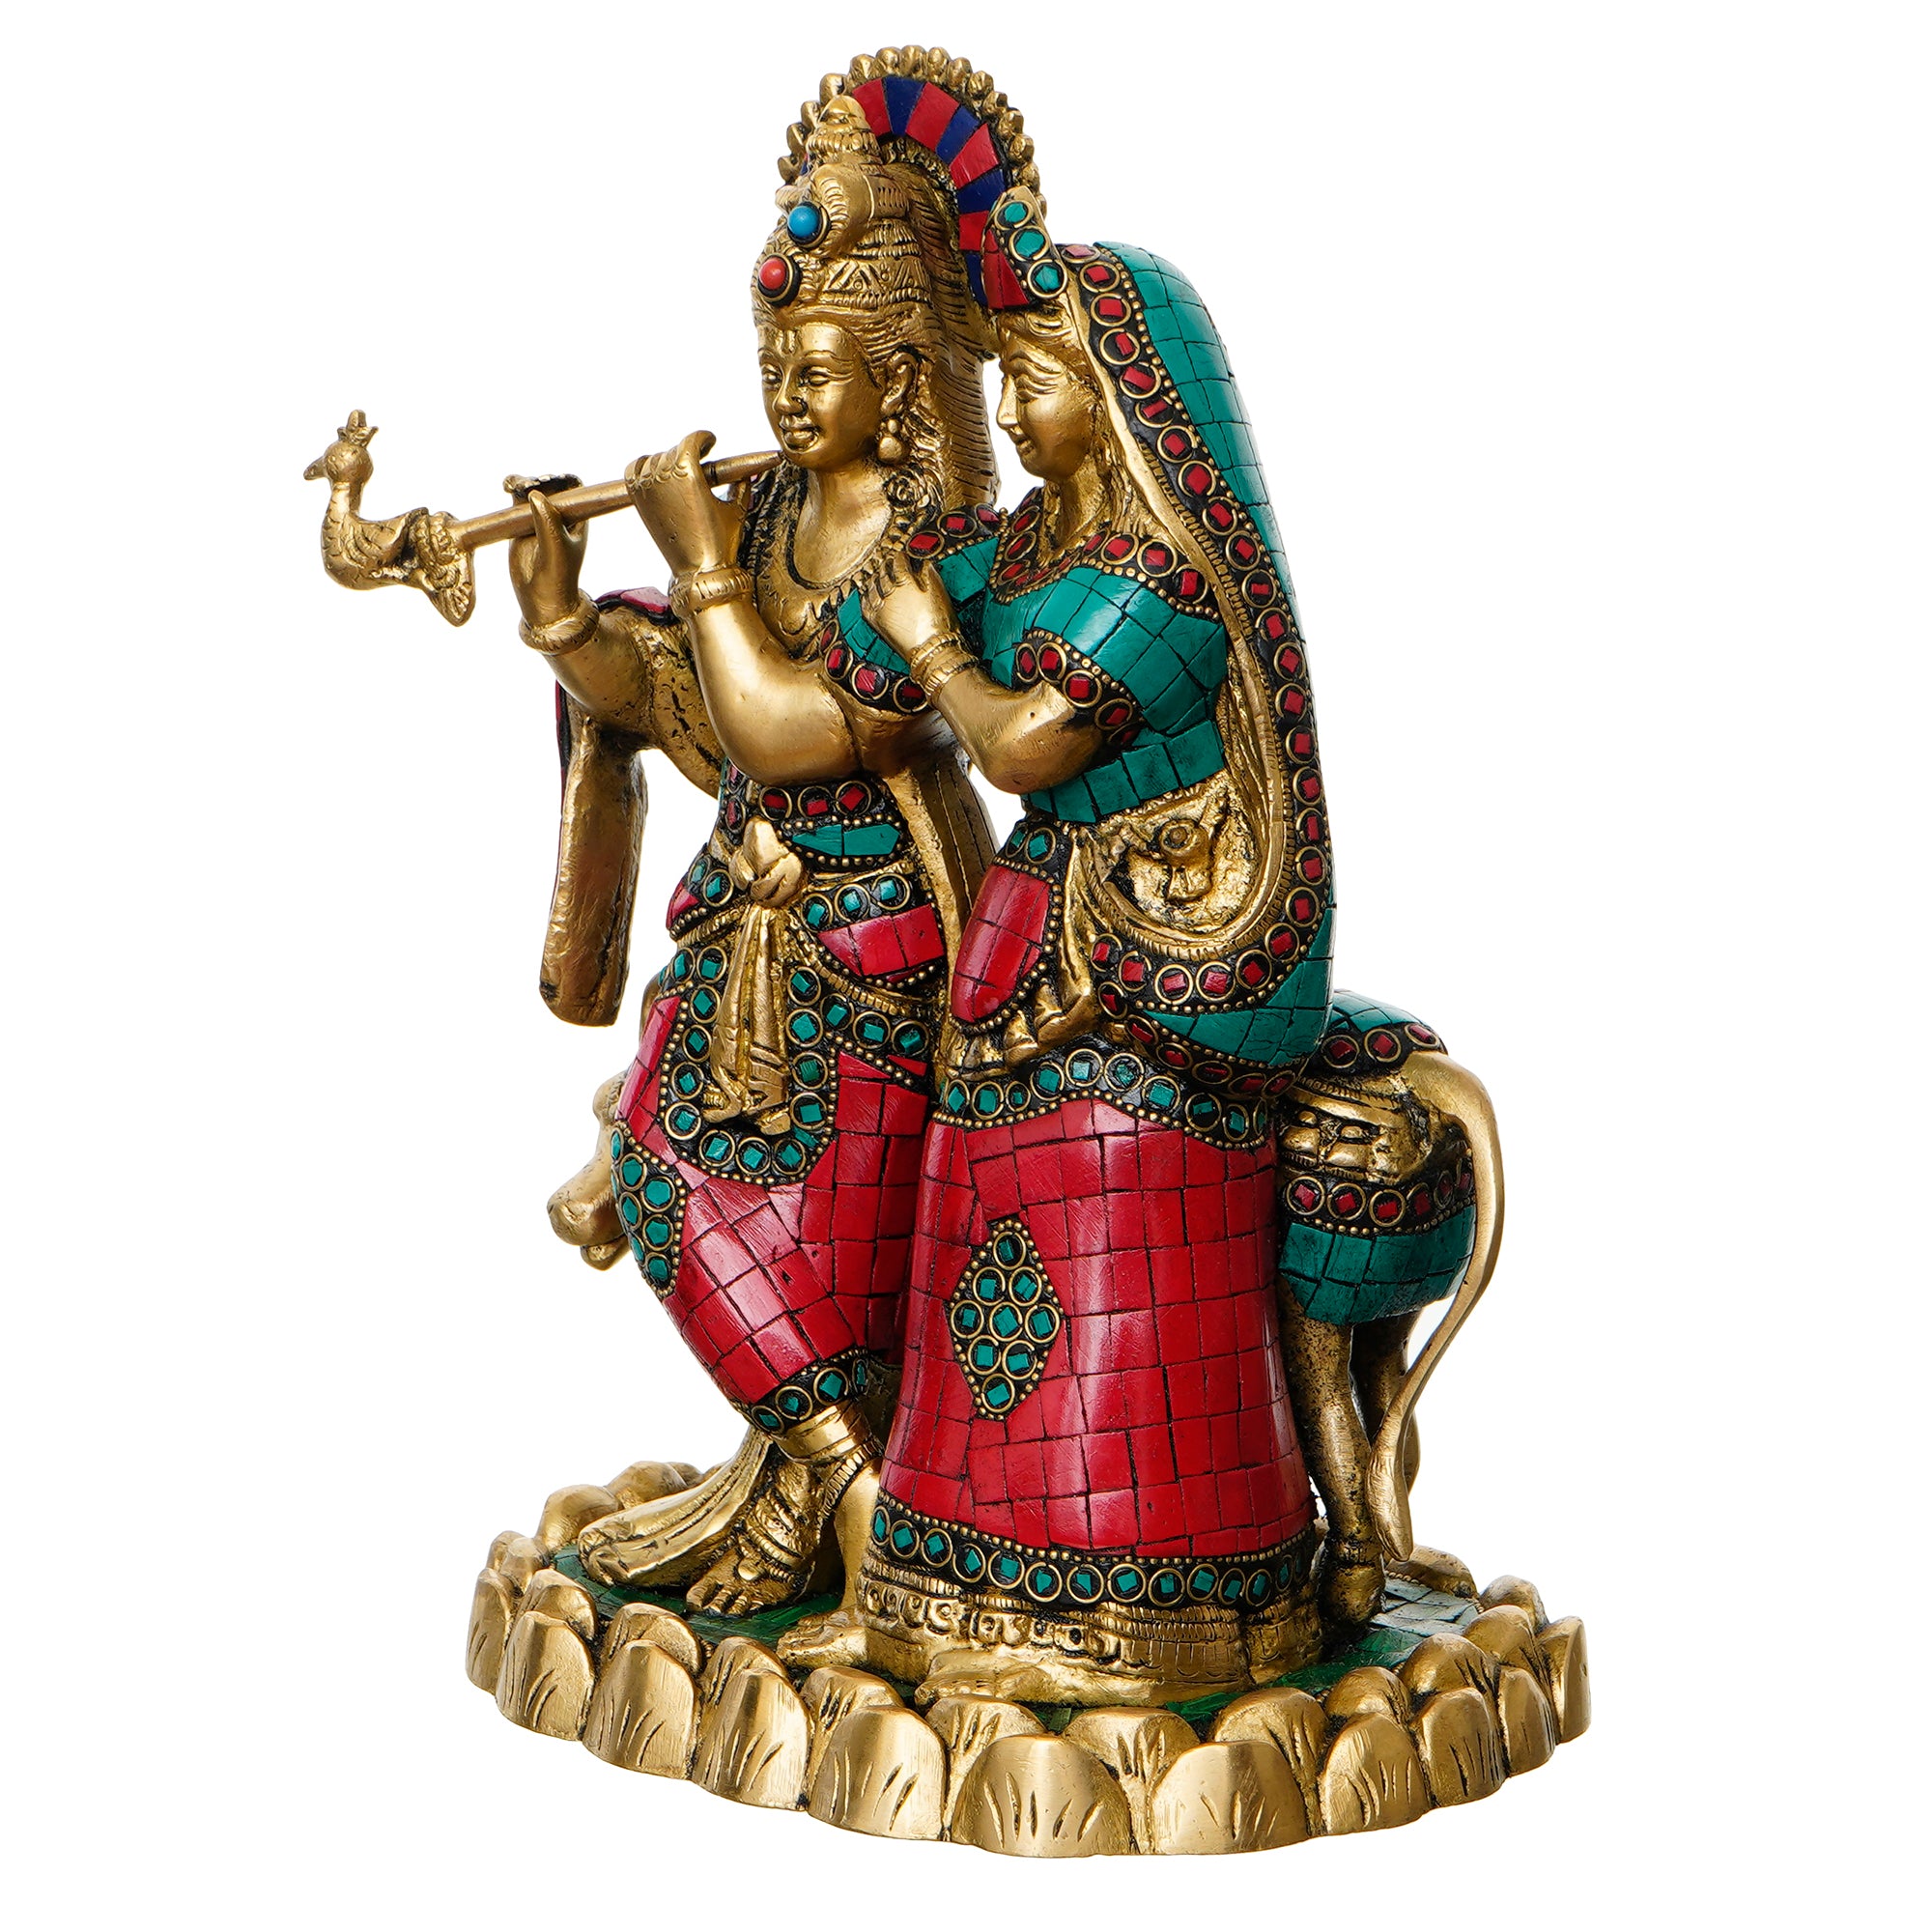 Colorful Stone Work Brass Radha Krishna Statue with Cow Figurine (Gold, Green, Red) 4